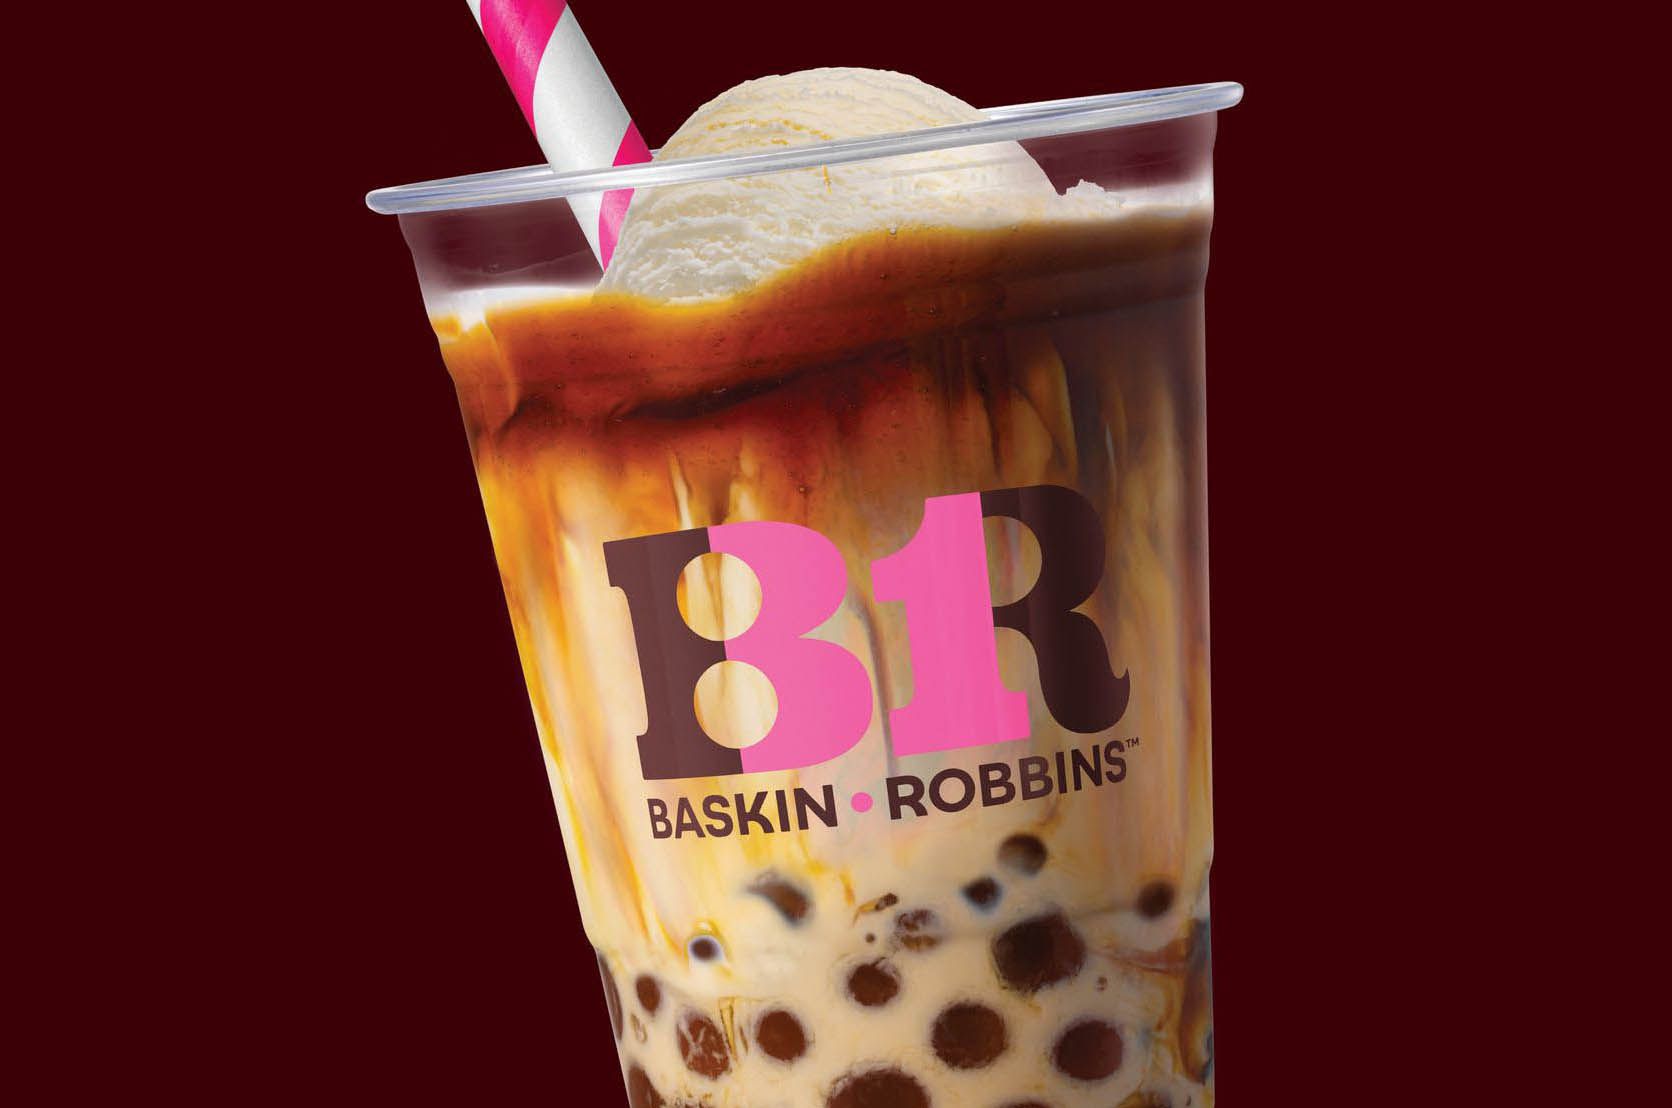 Baskin-Robbins Mixes It Up with their New Tiger Milk Bubble Tea with Brown Sugar Bubbles